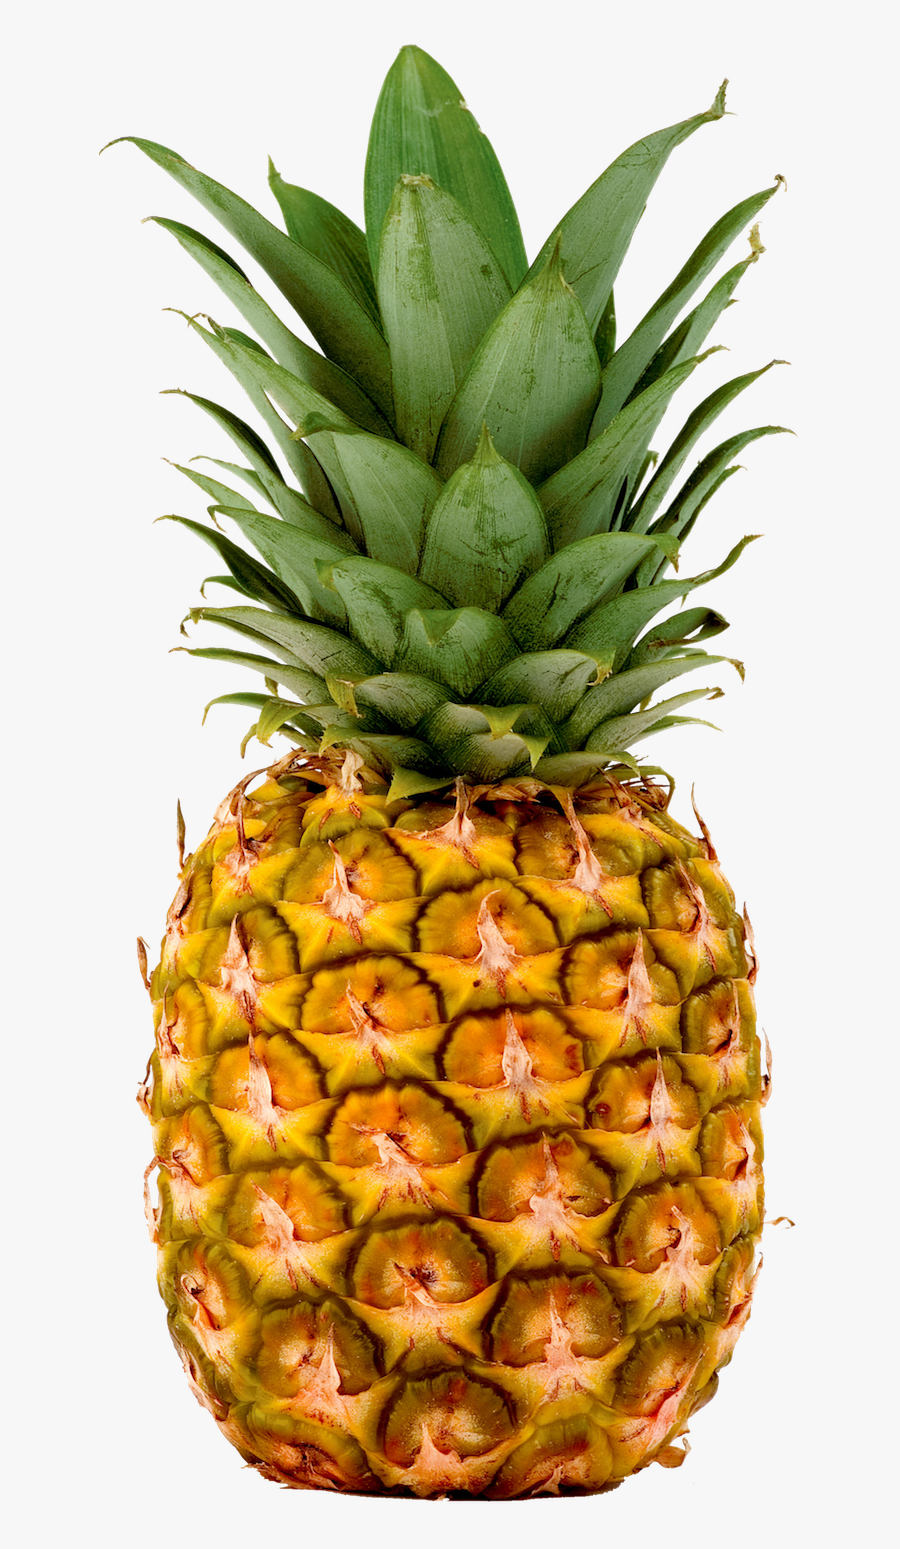 Pineapple, Pineapples Fresh Imports - Pineapple Png, Transparent Clipart